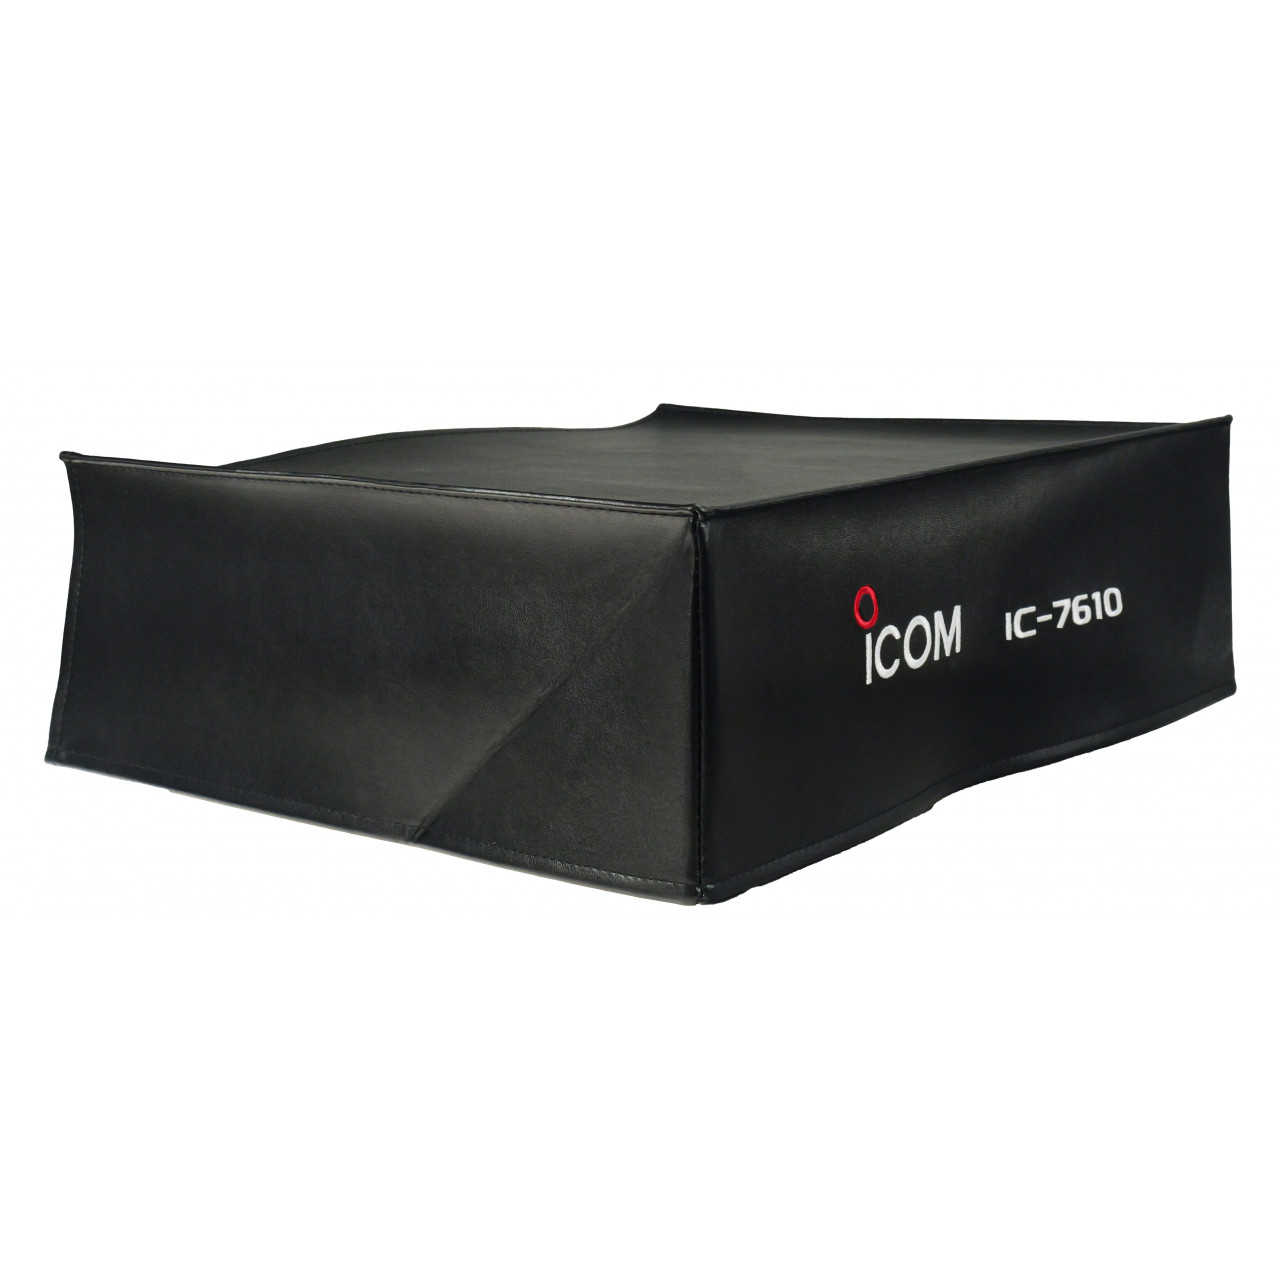 LC-COVER7610 Covers, fasteners and cradles - ICOM